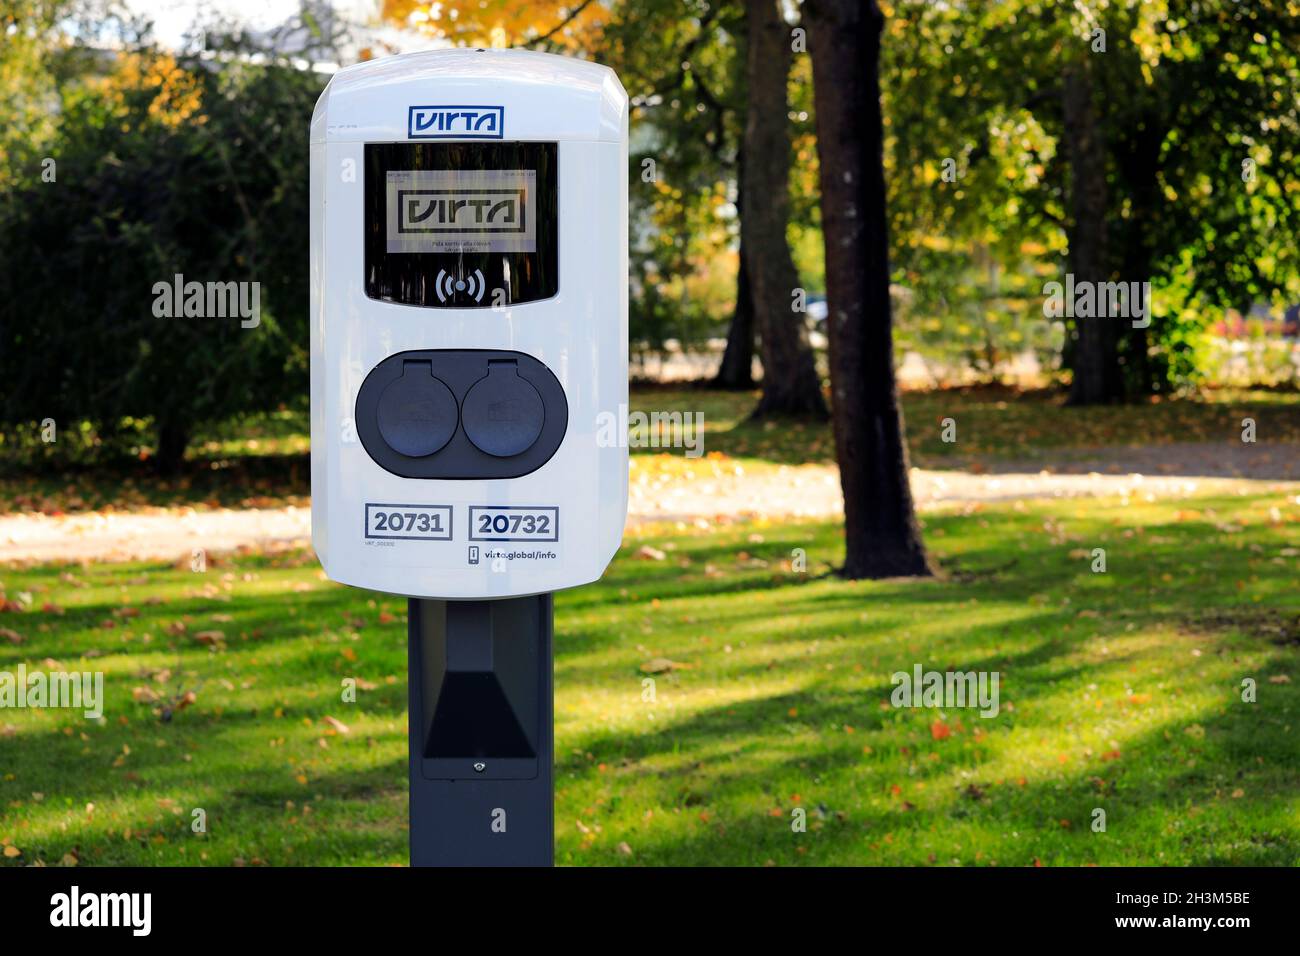 Virta Ltd ev charging point. Virta’s charging network is one of the widest in Europe, working in over 25 countries. Salo, Finland. September 19, 2020. Stock Photo